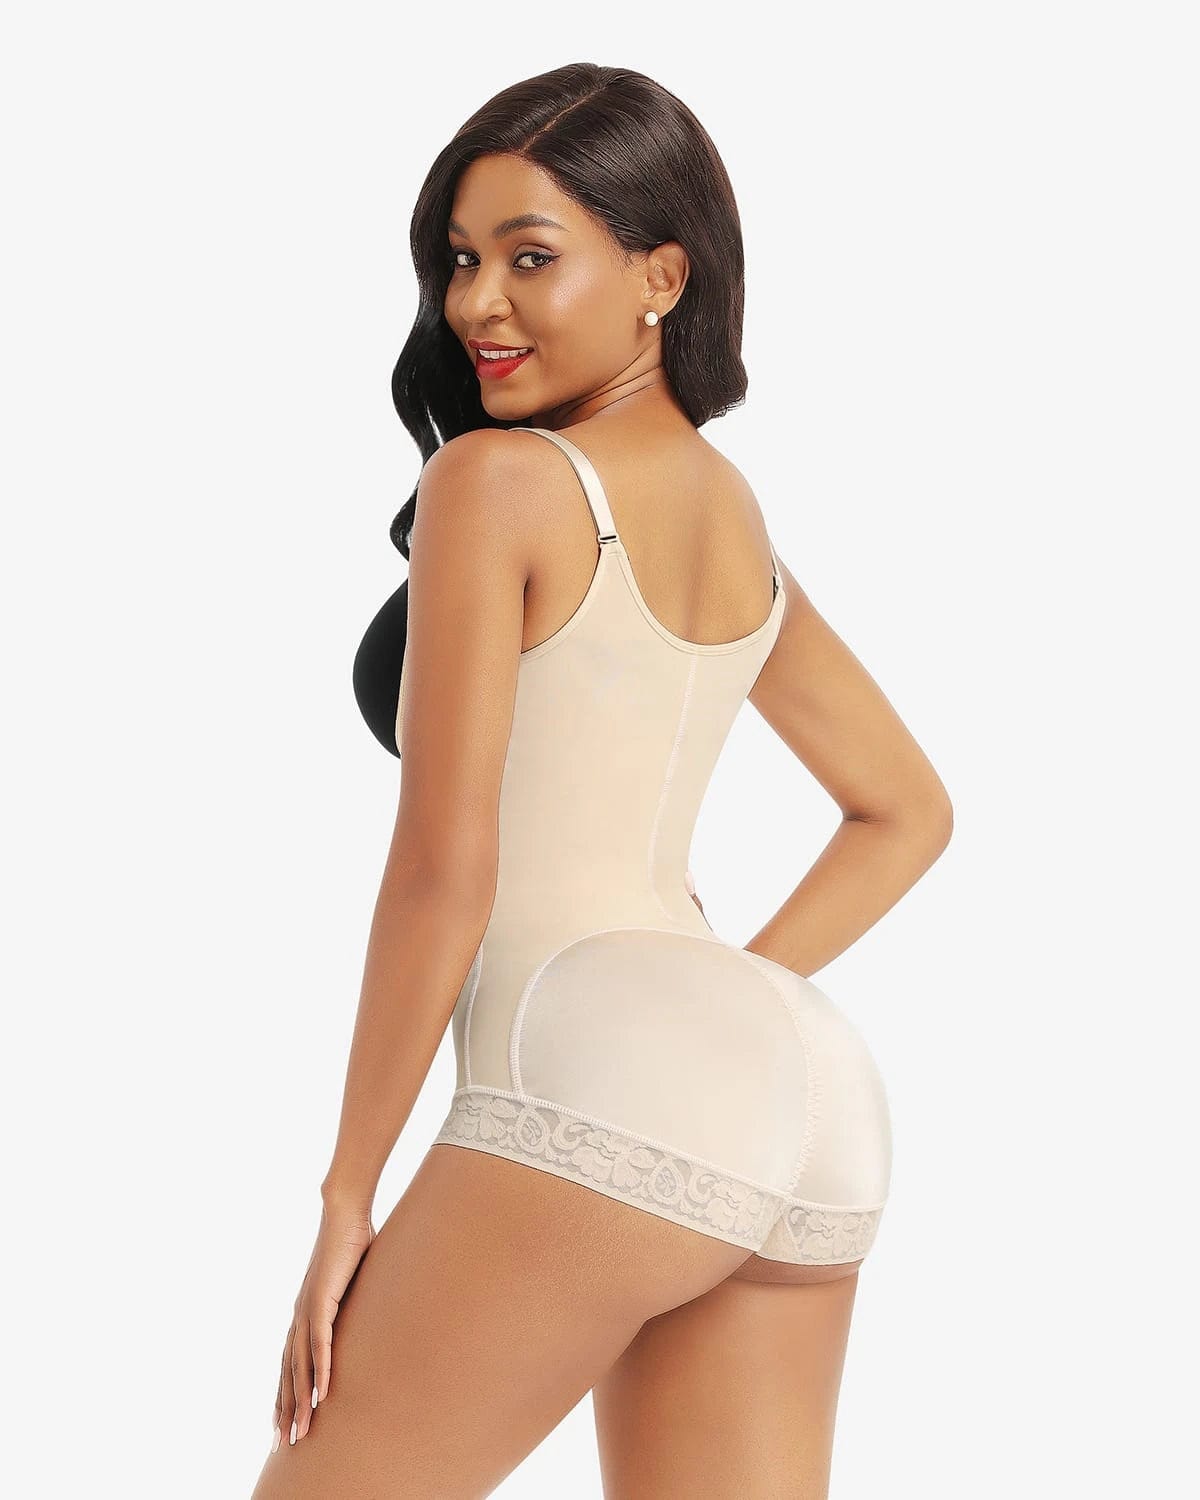 FULLY LINED LACE NON WIRE ZIP UP BODY SHAPER